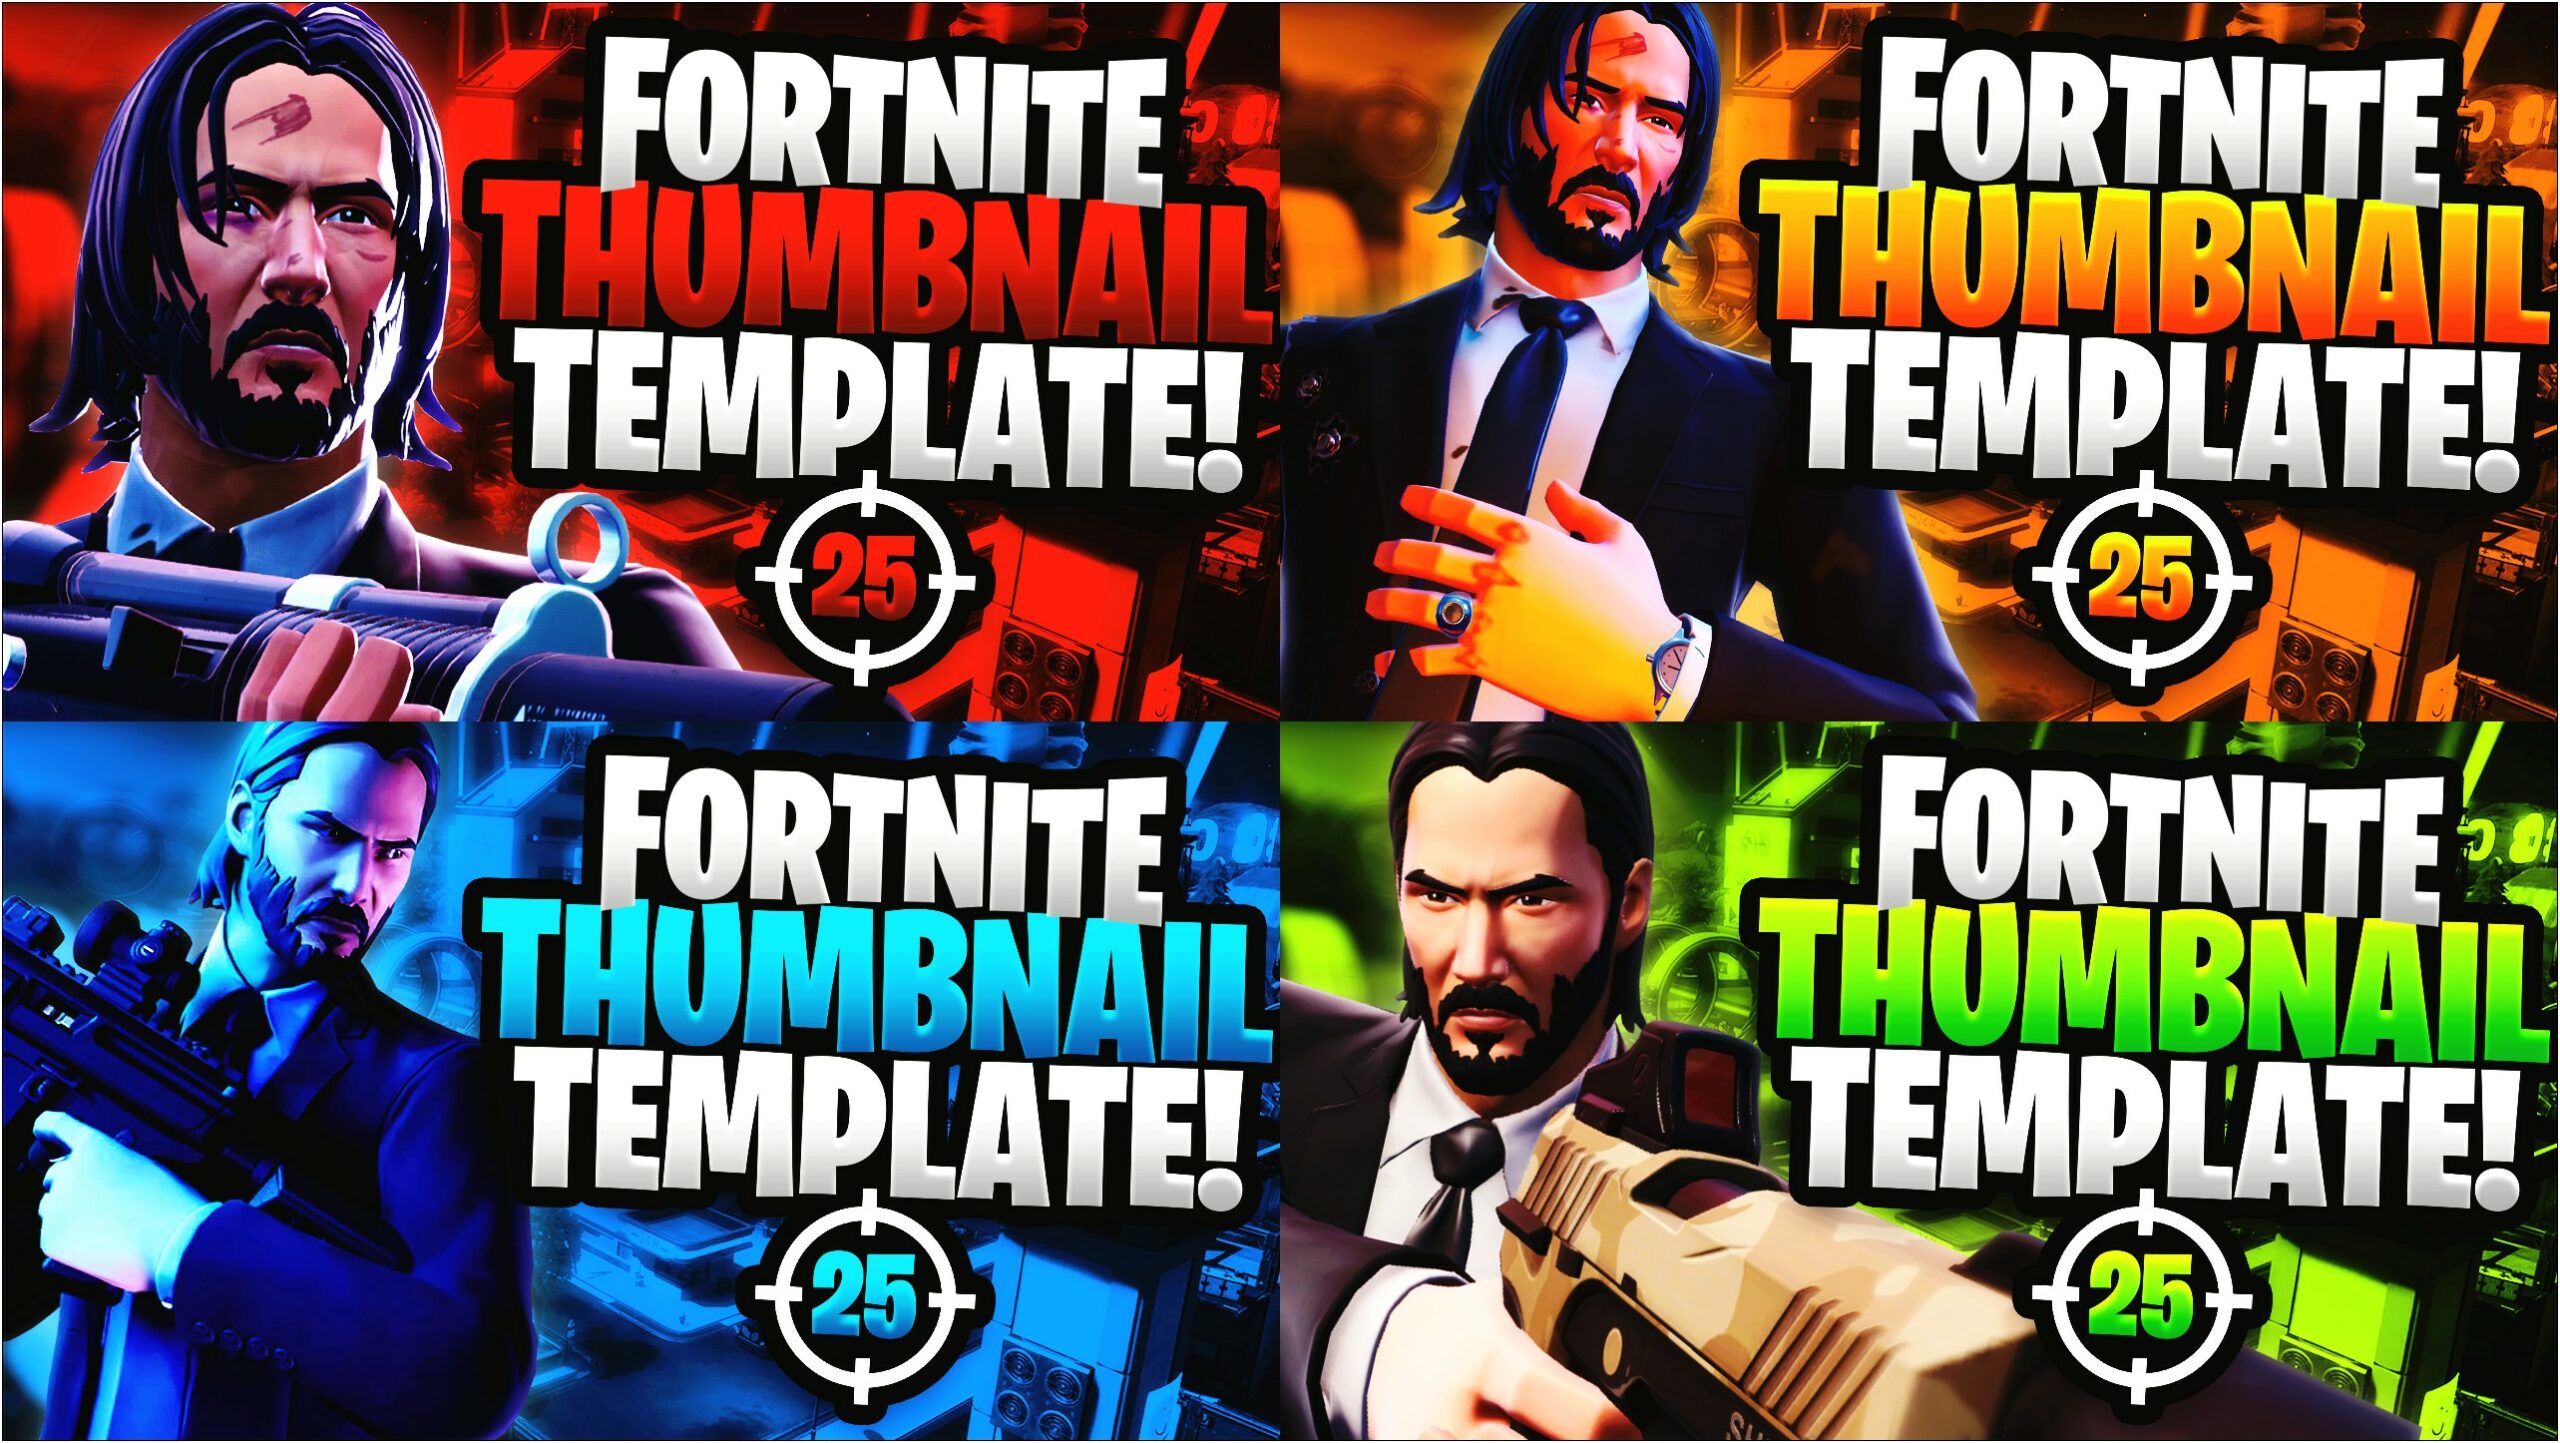 Fortnite Thumbnail Template With Kill Feed Download